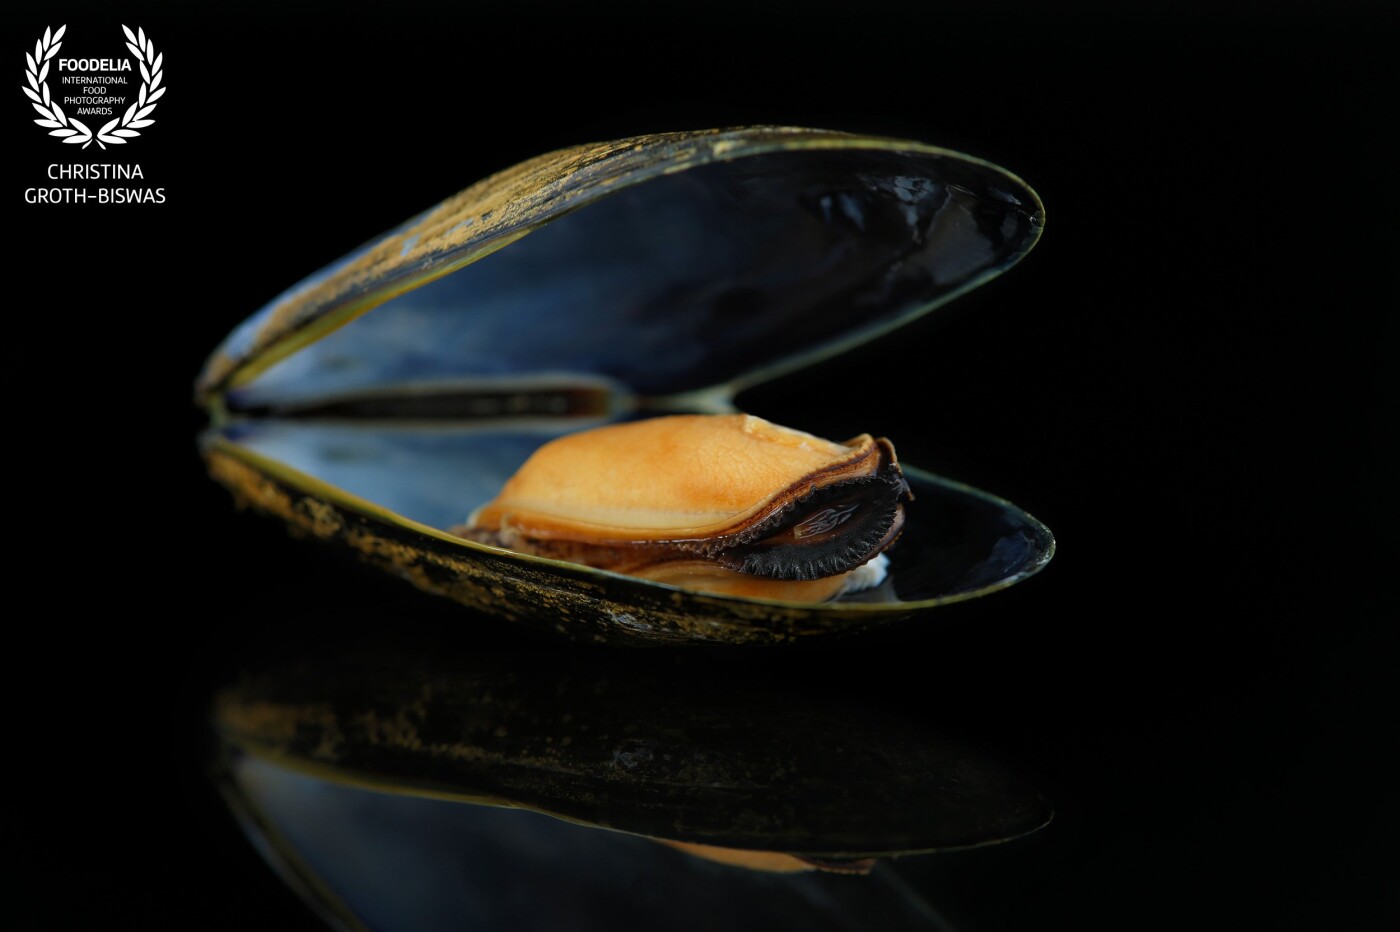 Close-up of a freshly boiled mussel on black background. The golden yellow of both the flesh and outer shell contrasts the blue-ish hue of the inner shell perfectly.